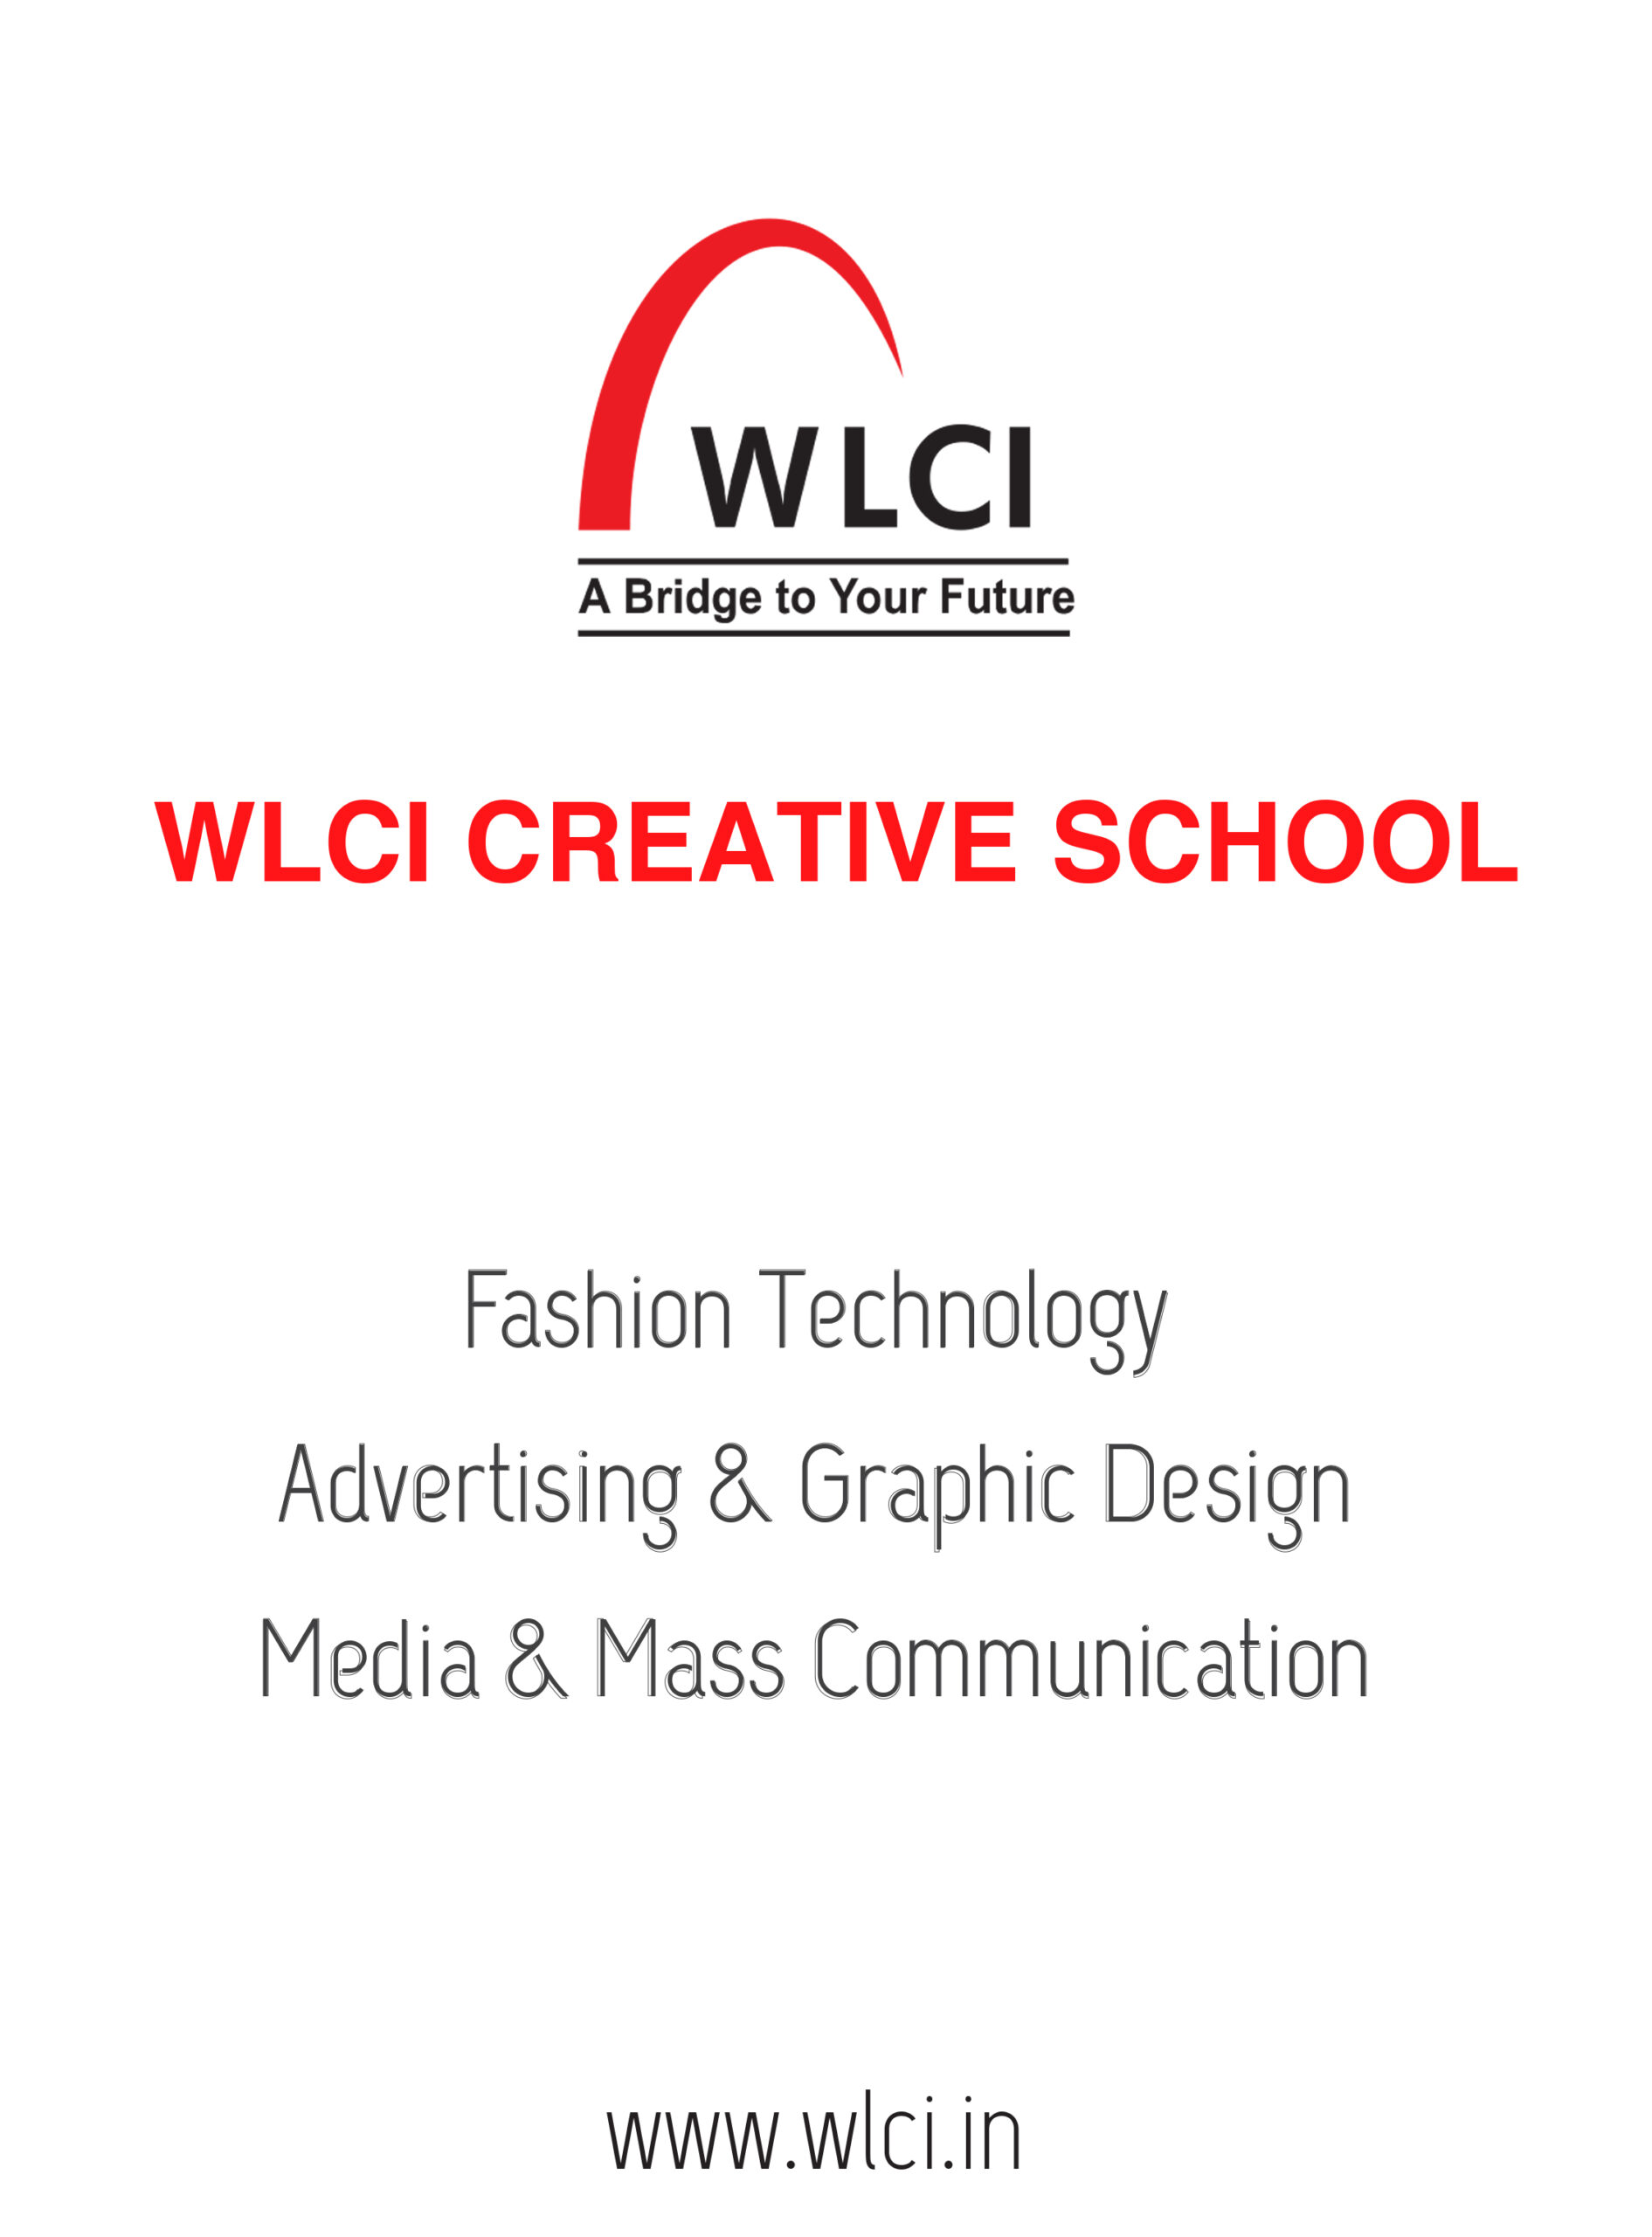 WLCL